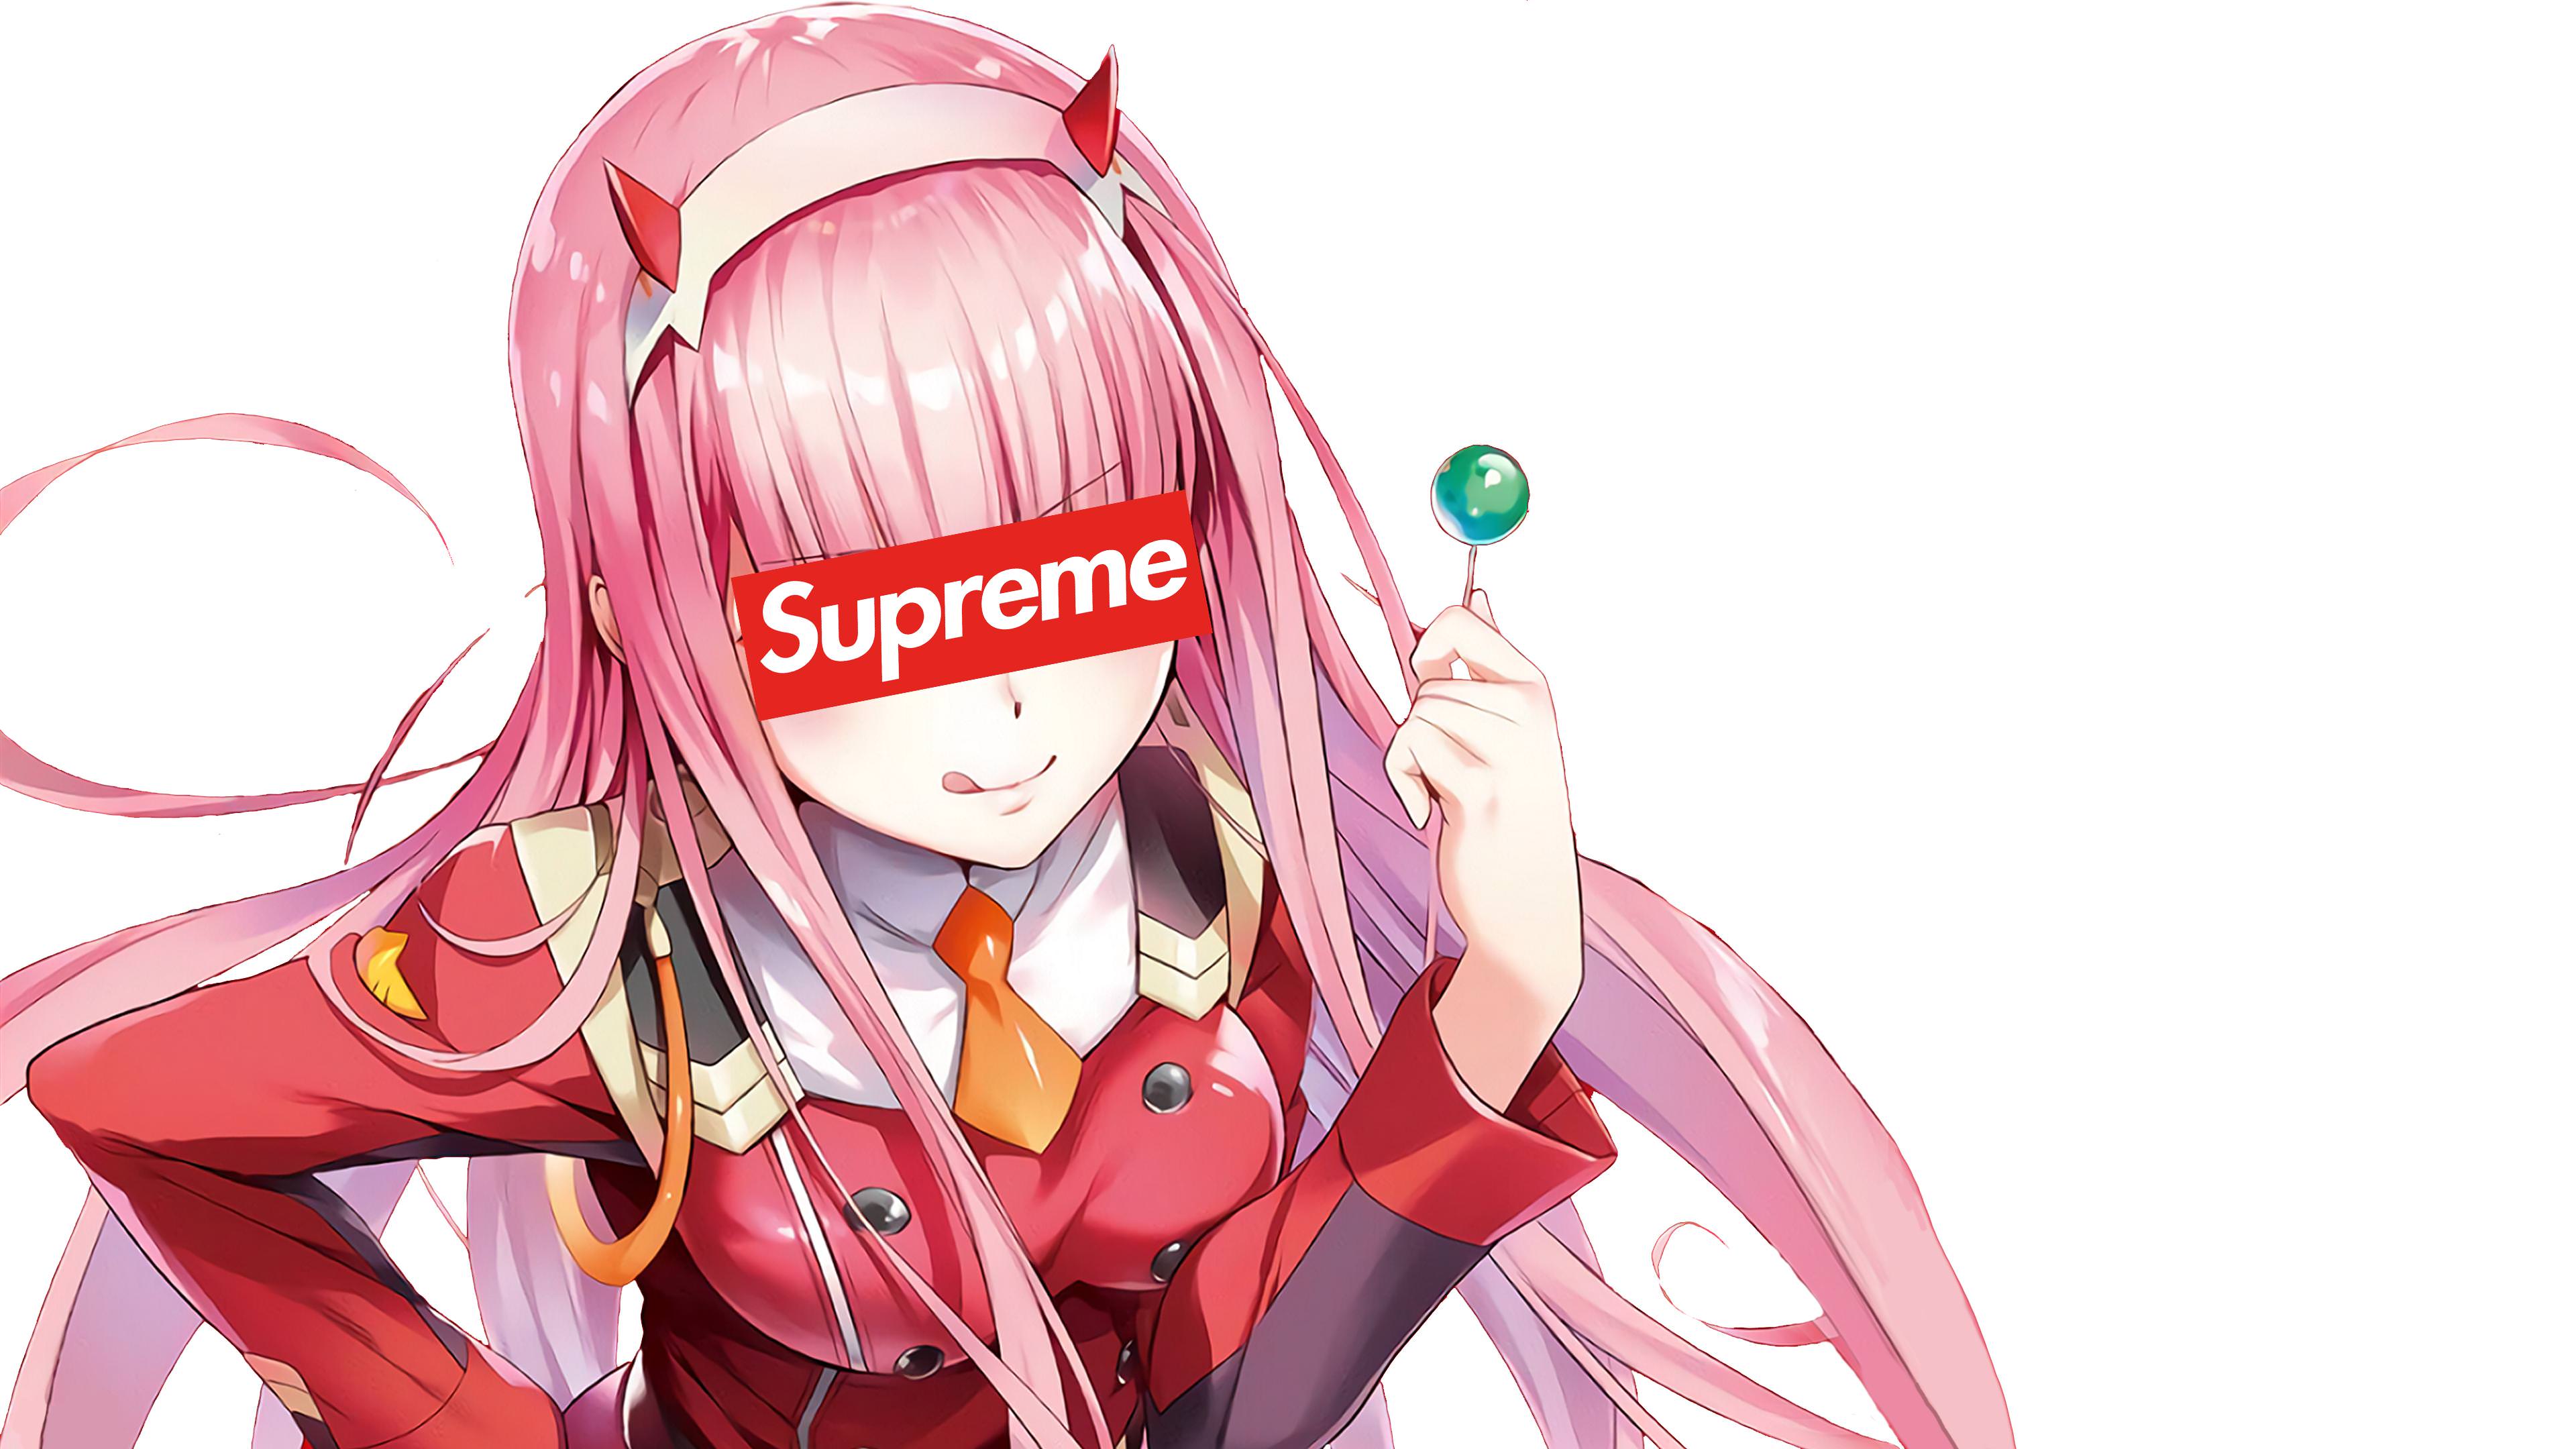 Download Anime characters rocking Supreme fashion Wallpaper | Wallpapers.com